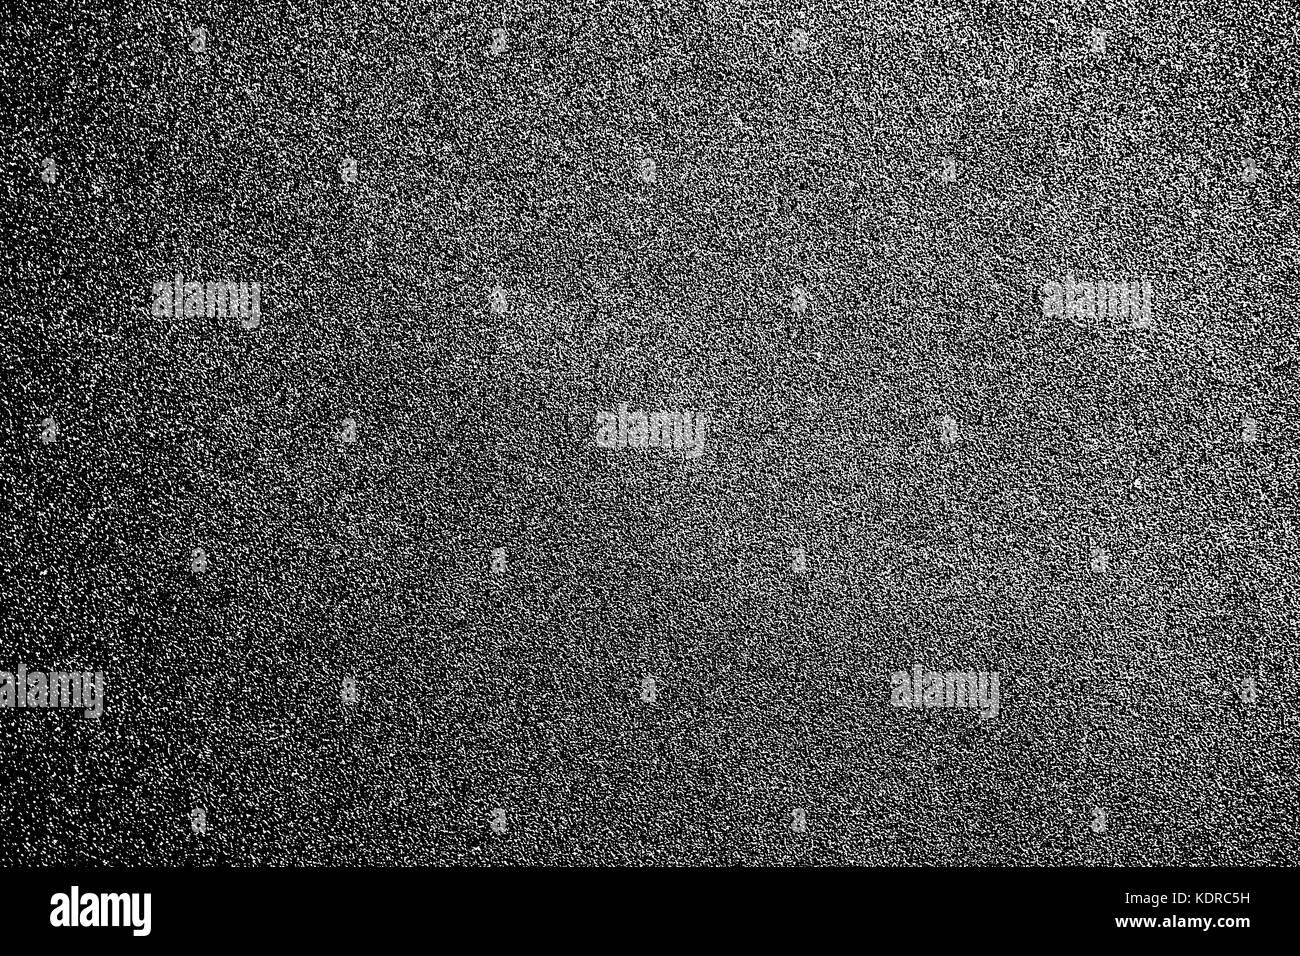 Noise texture.Grunge dust grain messy for overlay or abstract dark background Stock Photo